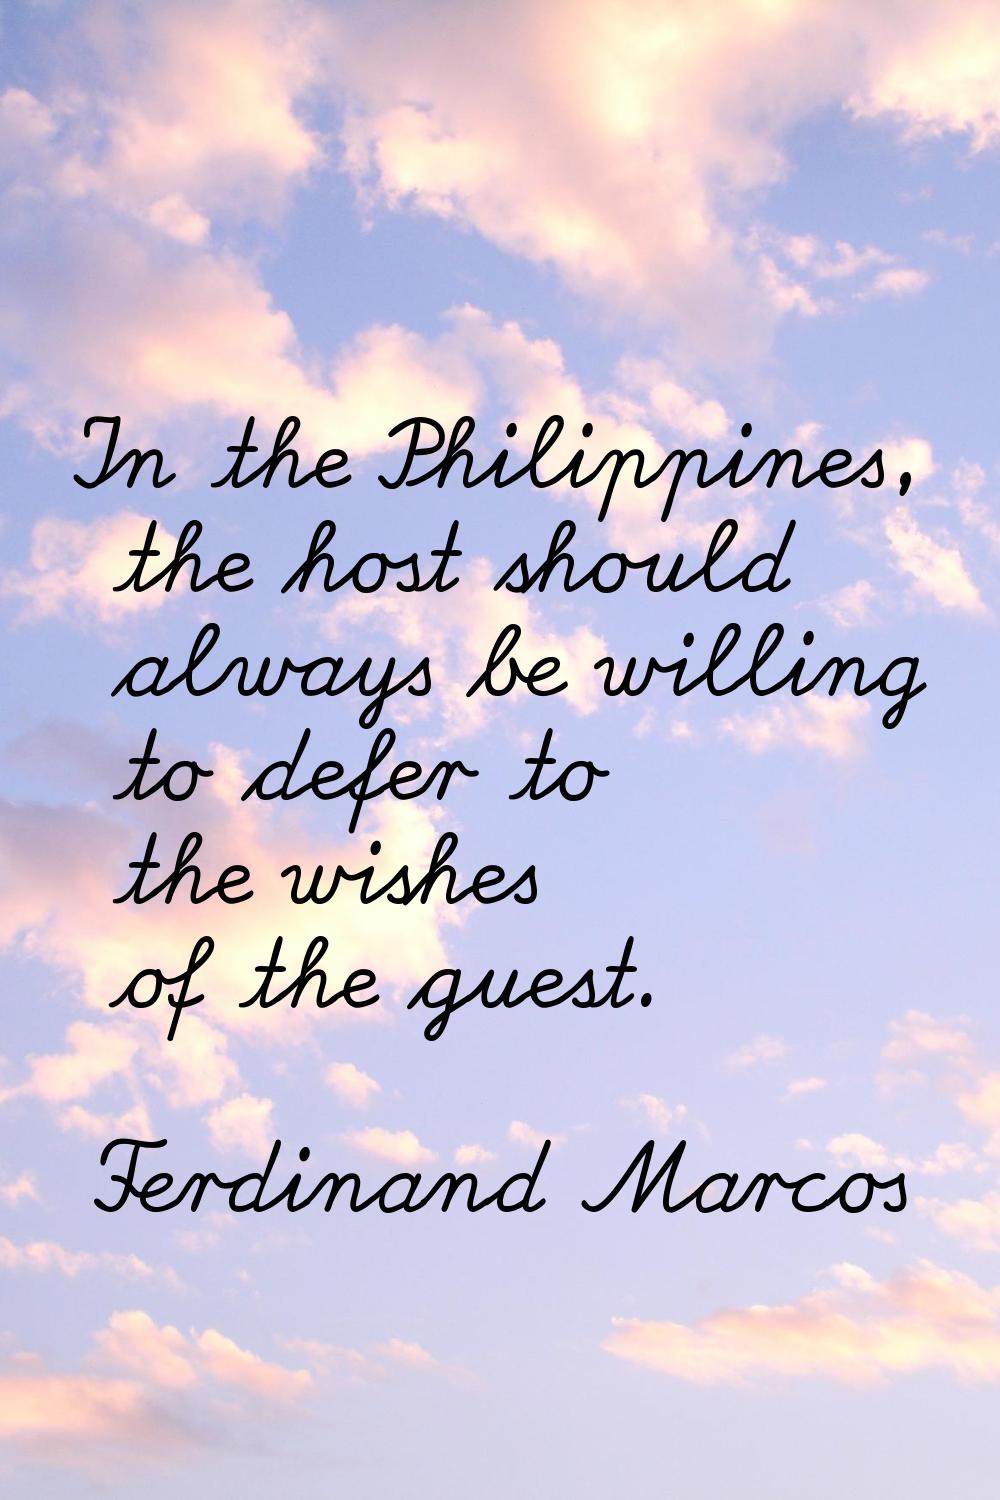 In the Philippines, the host should always be willing to defer to the wishes of the guest.